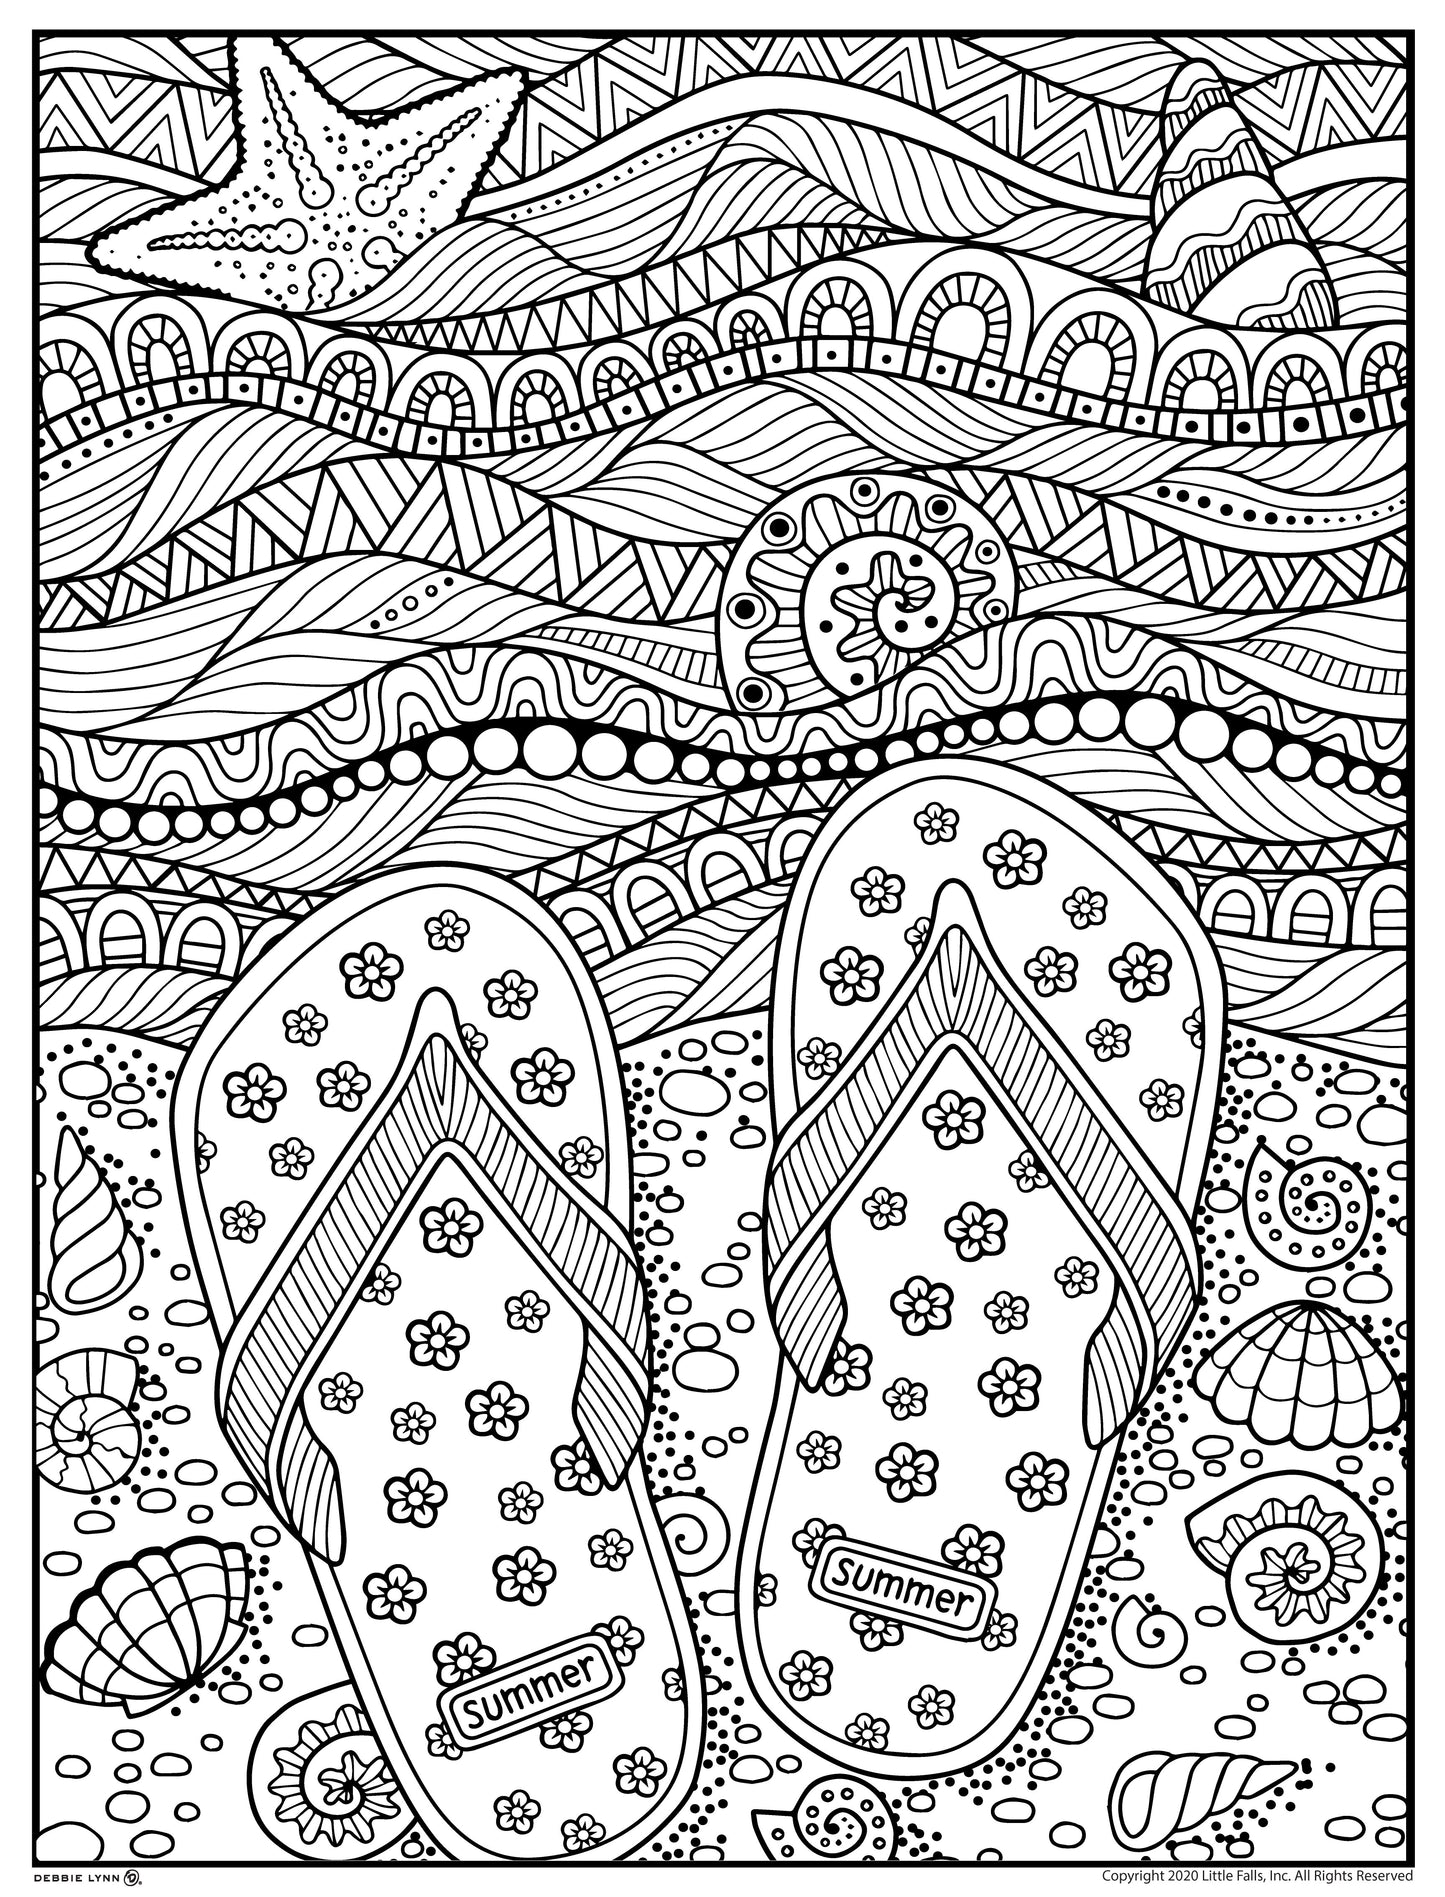 Flip Flops Personalized Giant Coloring Poster 46"x60"